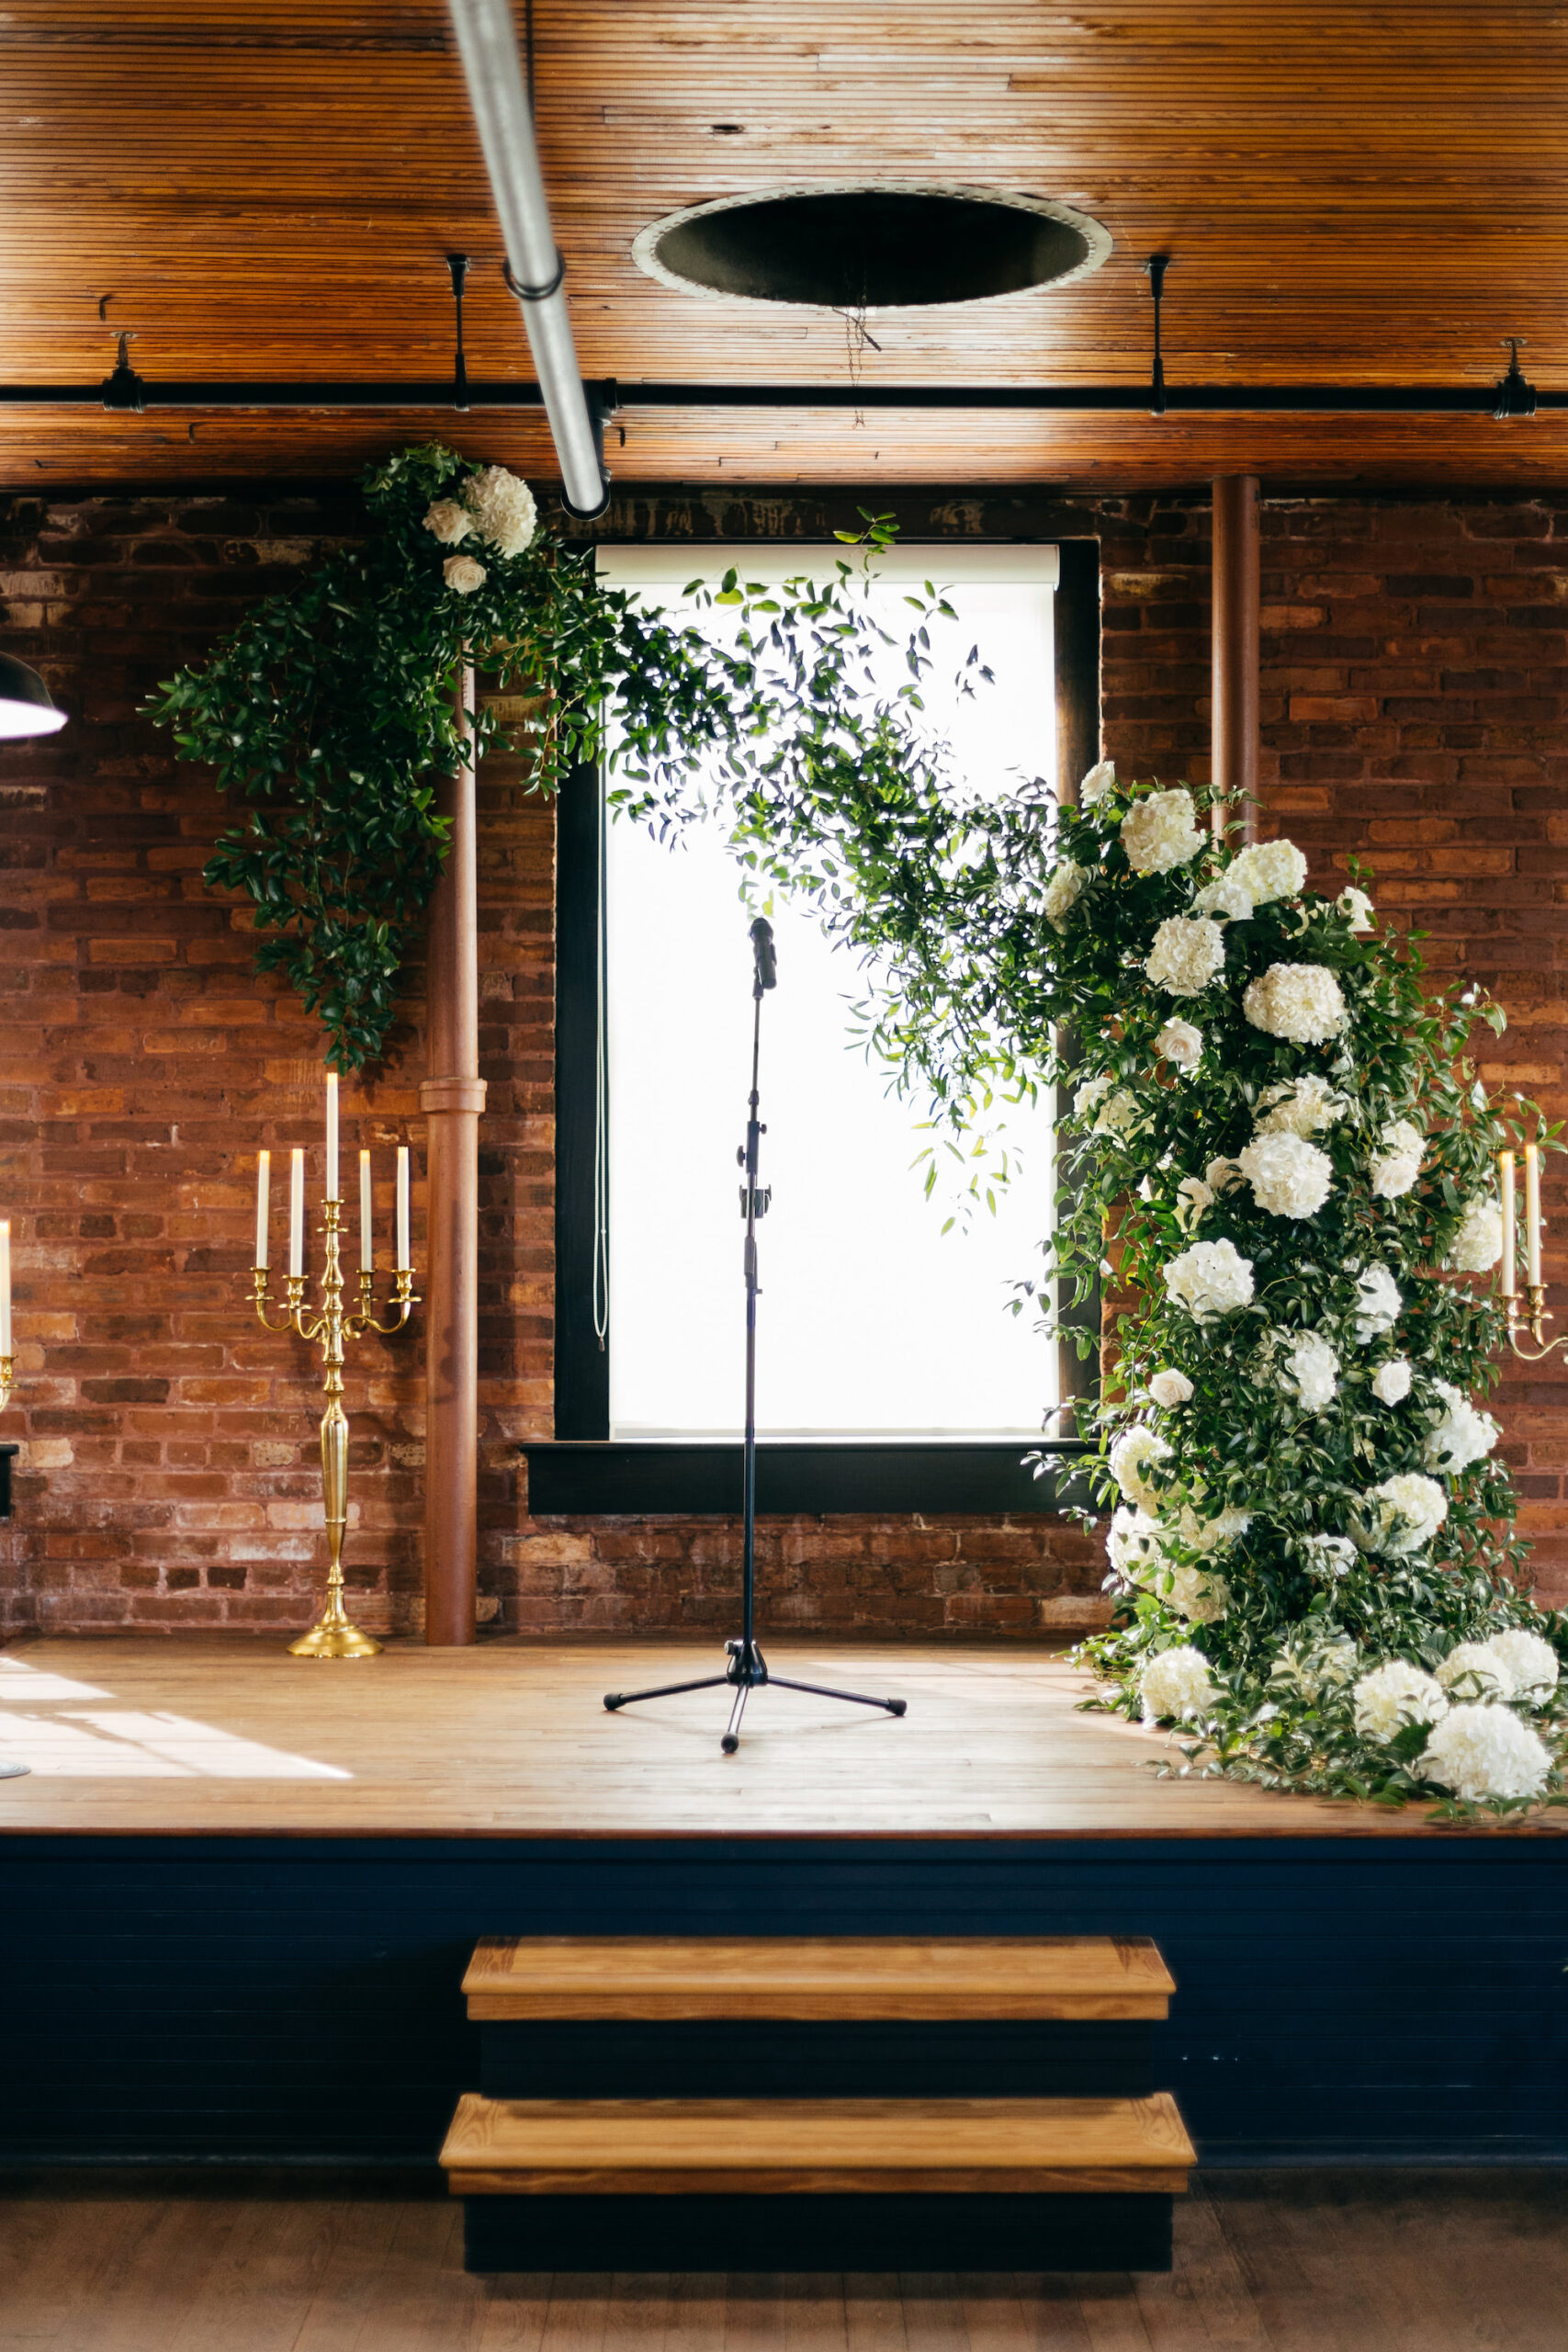 Whimsical White Hydrangea and Greenery Wedding Ceremony Arch With Gold Candelabra | Tampa Bay Florist Bruce Wayne Florals